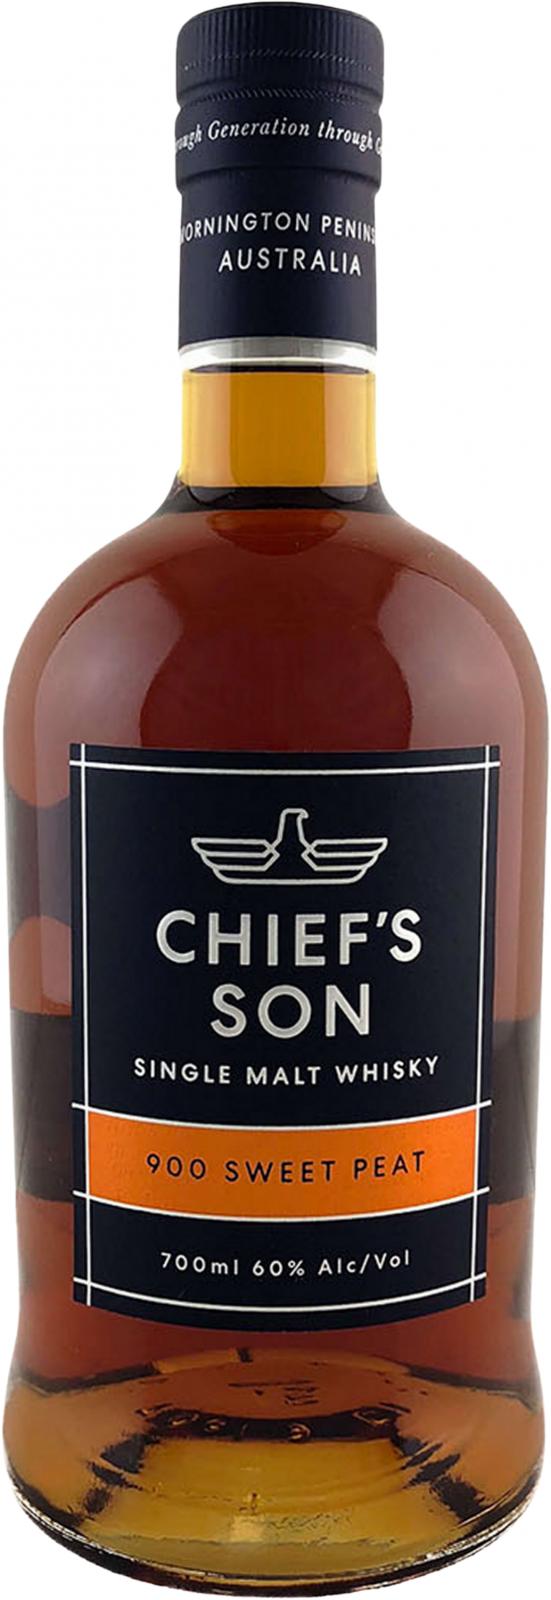 Chief's Son 900 Sweet Peat Release 2 French Oak Ex-fortified #94 60% 700ml